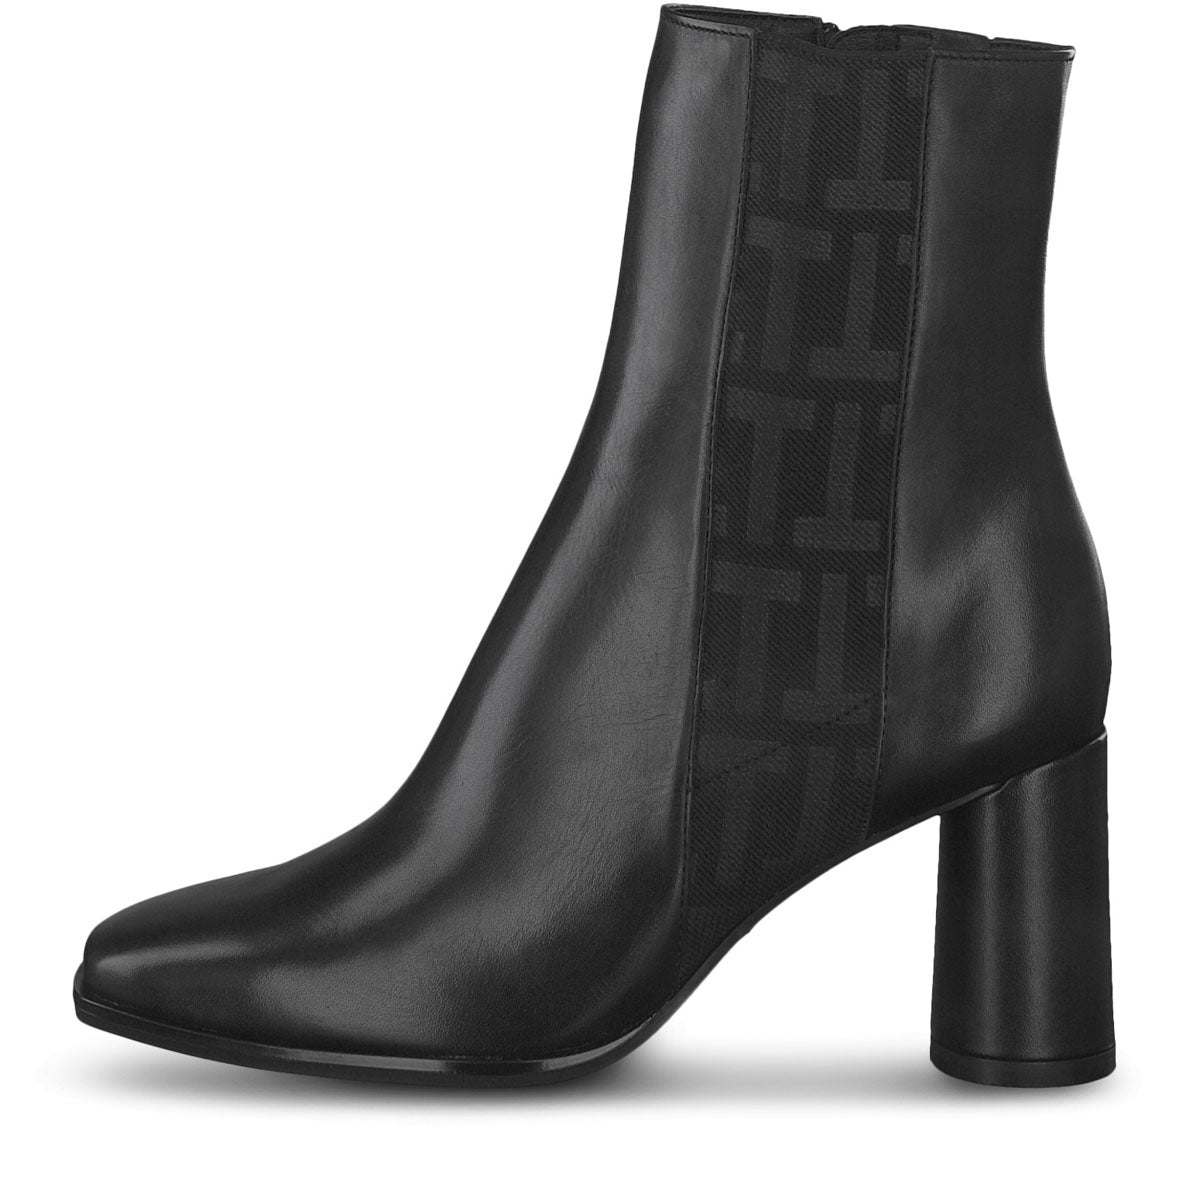 Frontal view of the pair of Tamaris Ankle Boots.